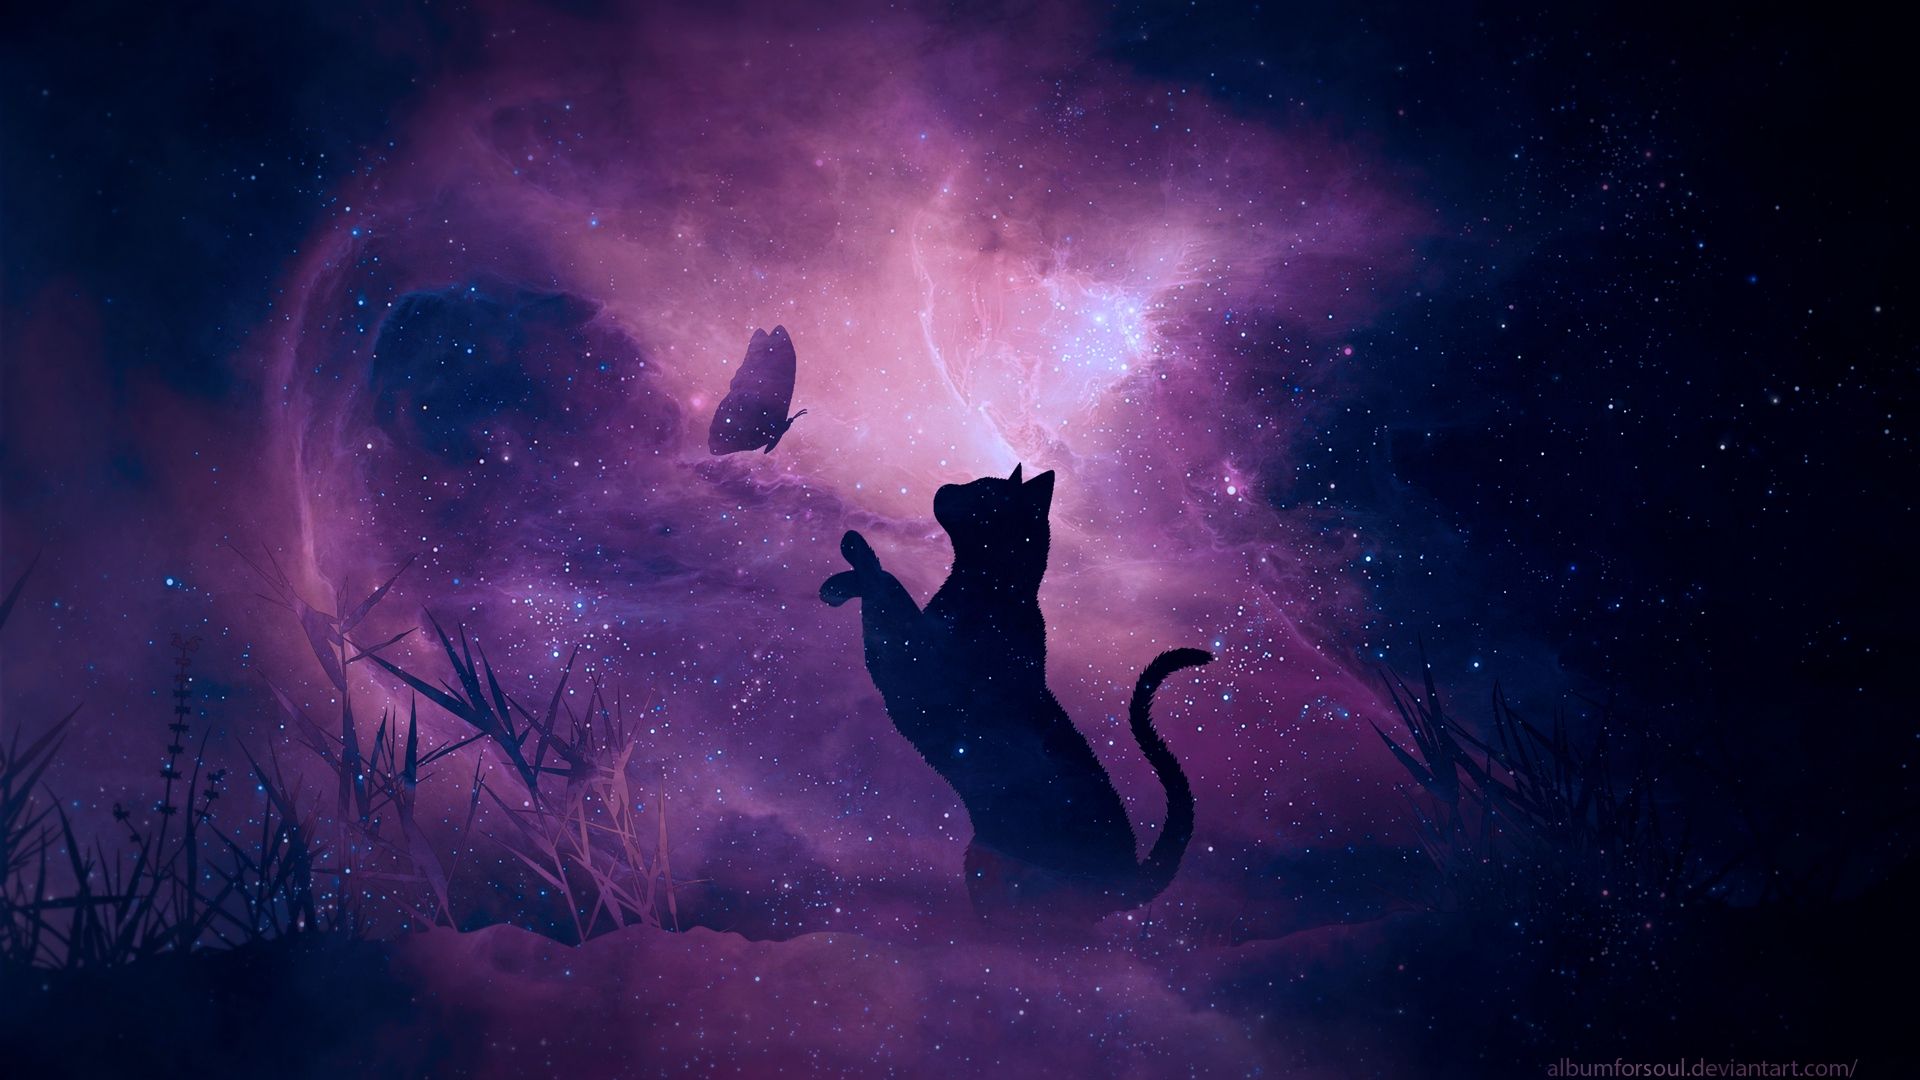 Free download Free download Fantasy animals Purple galaxy wallpaper Laptop [1920x1080] for your Desktop, Mobile & Tablet. Explore Amazing Cat Galaxy Wallpaper. Wallpaper Amazing, Amazing Wallpaper, Amazing Background